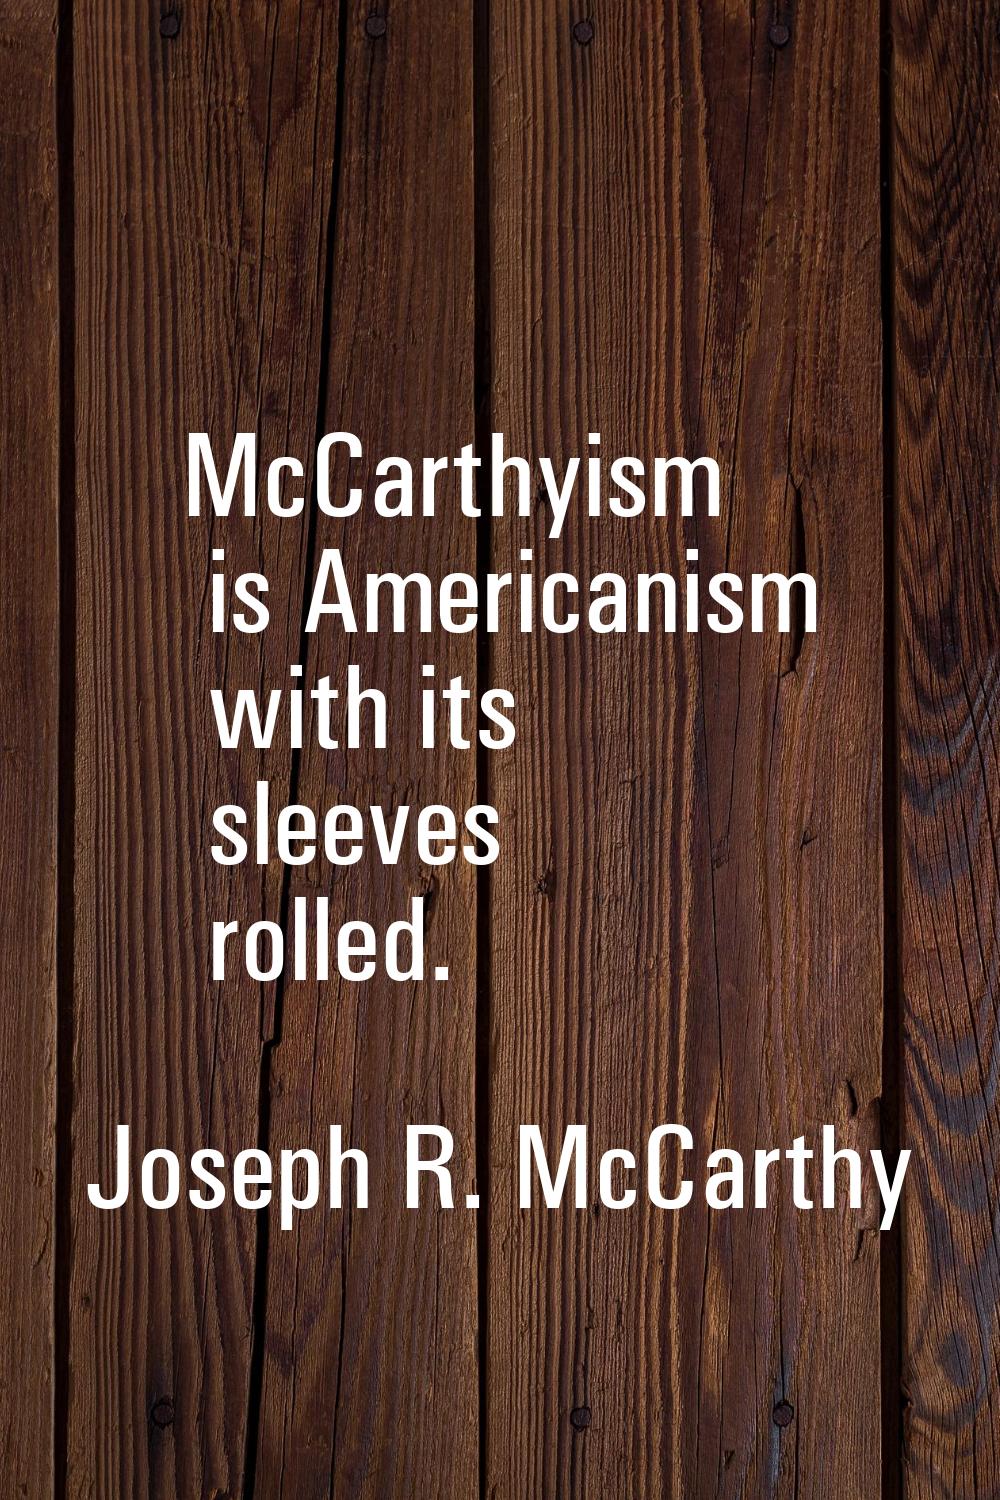 McCarthyism is Americanism with its sleeves rolled.